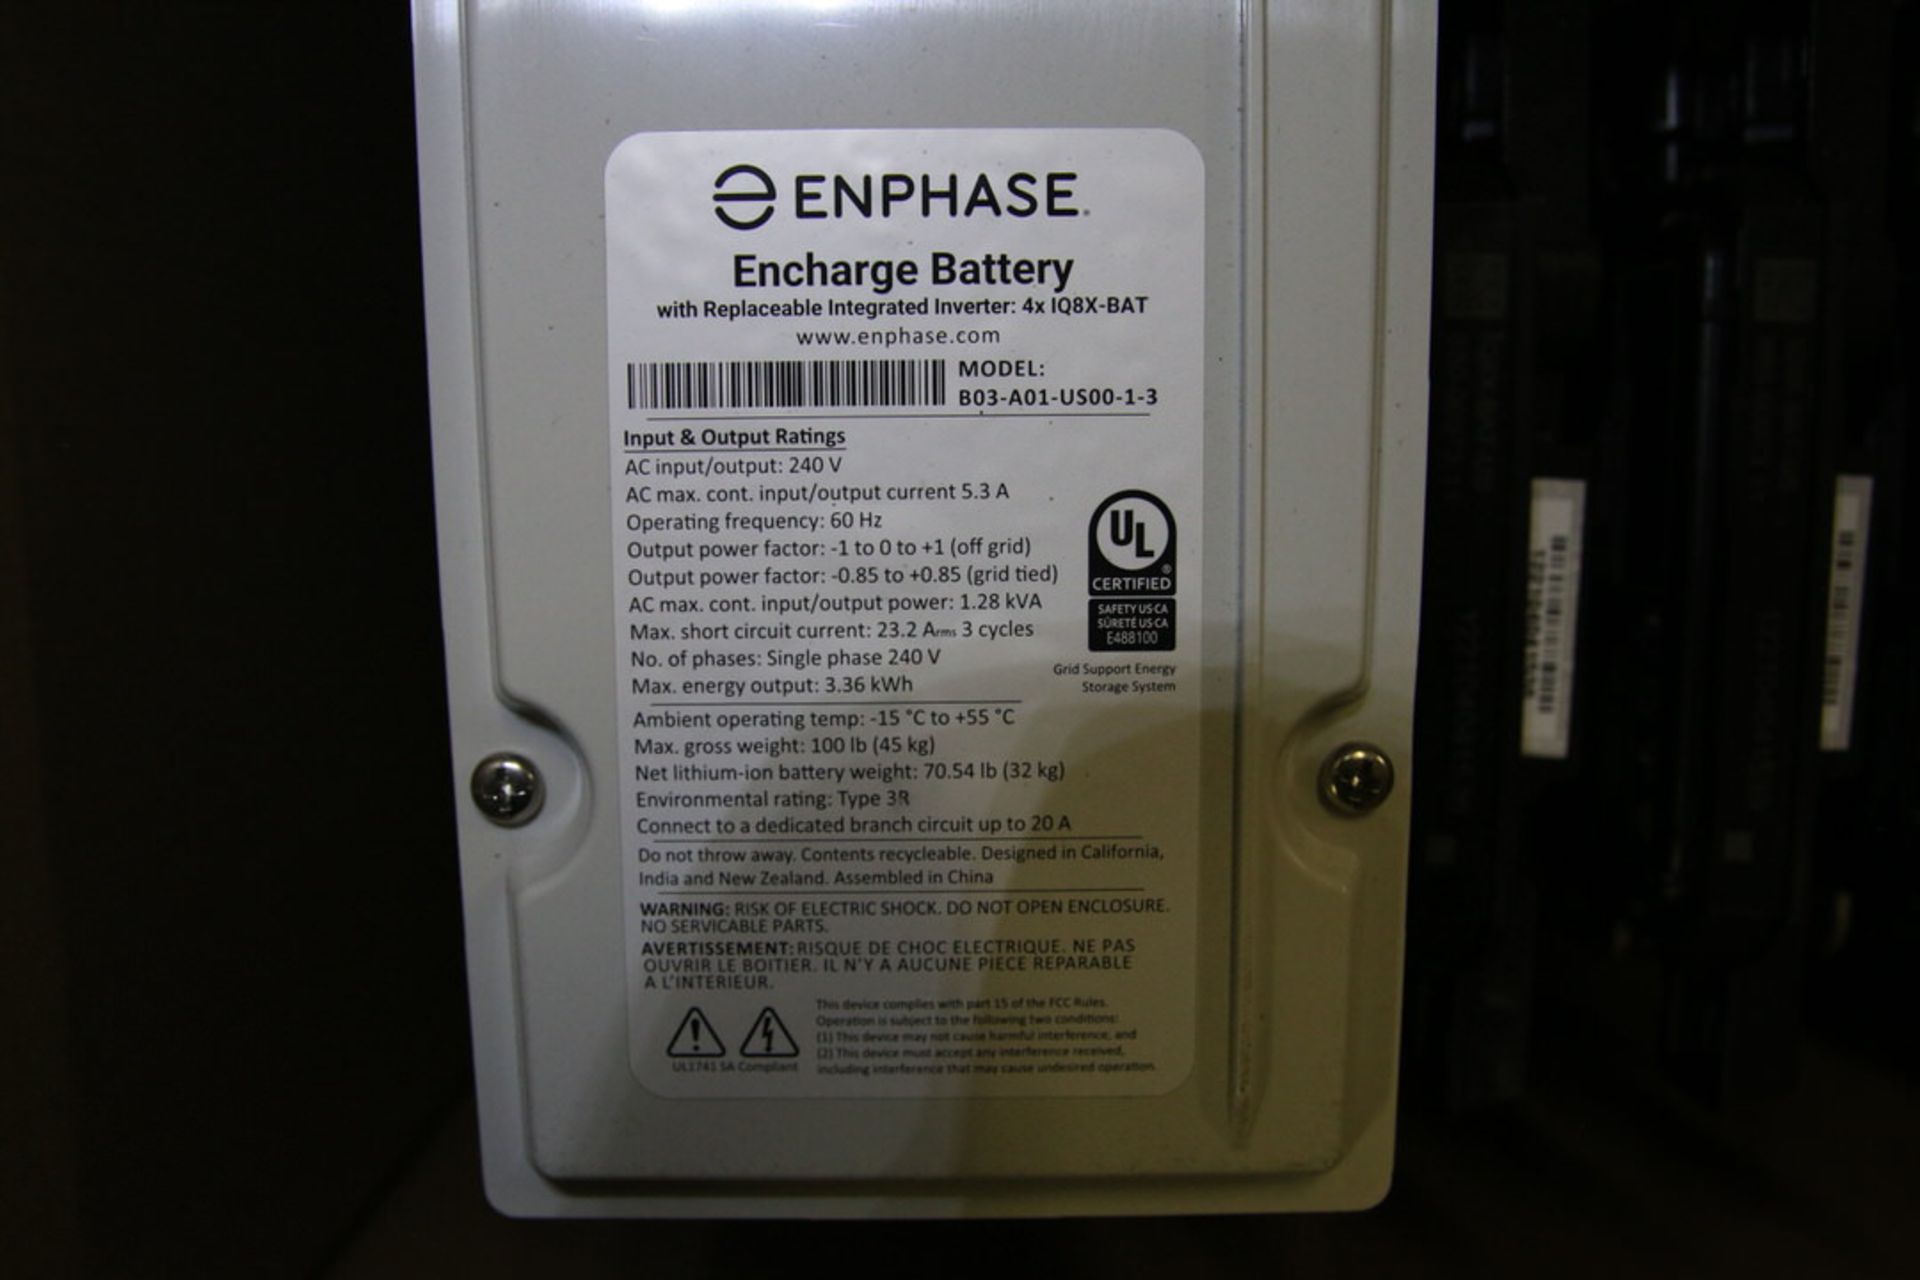 Enphase Encharge Battery with Replaceable Integrated Inverter - Image 3 of 3